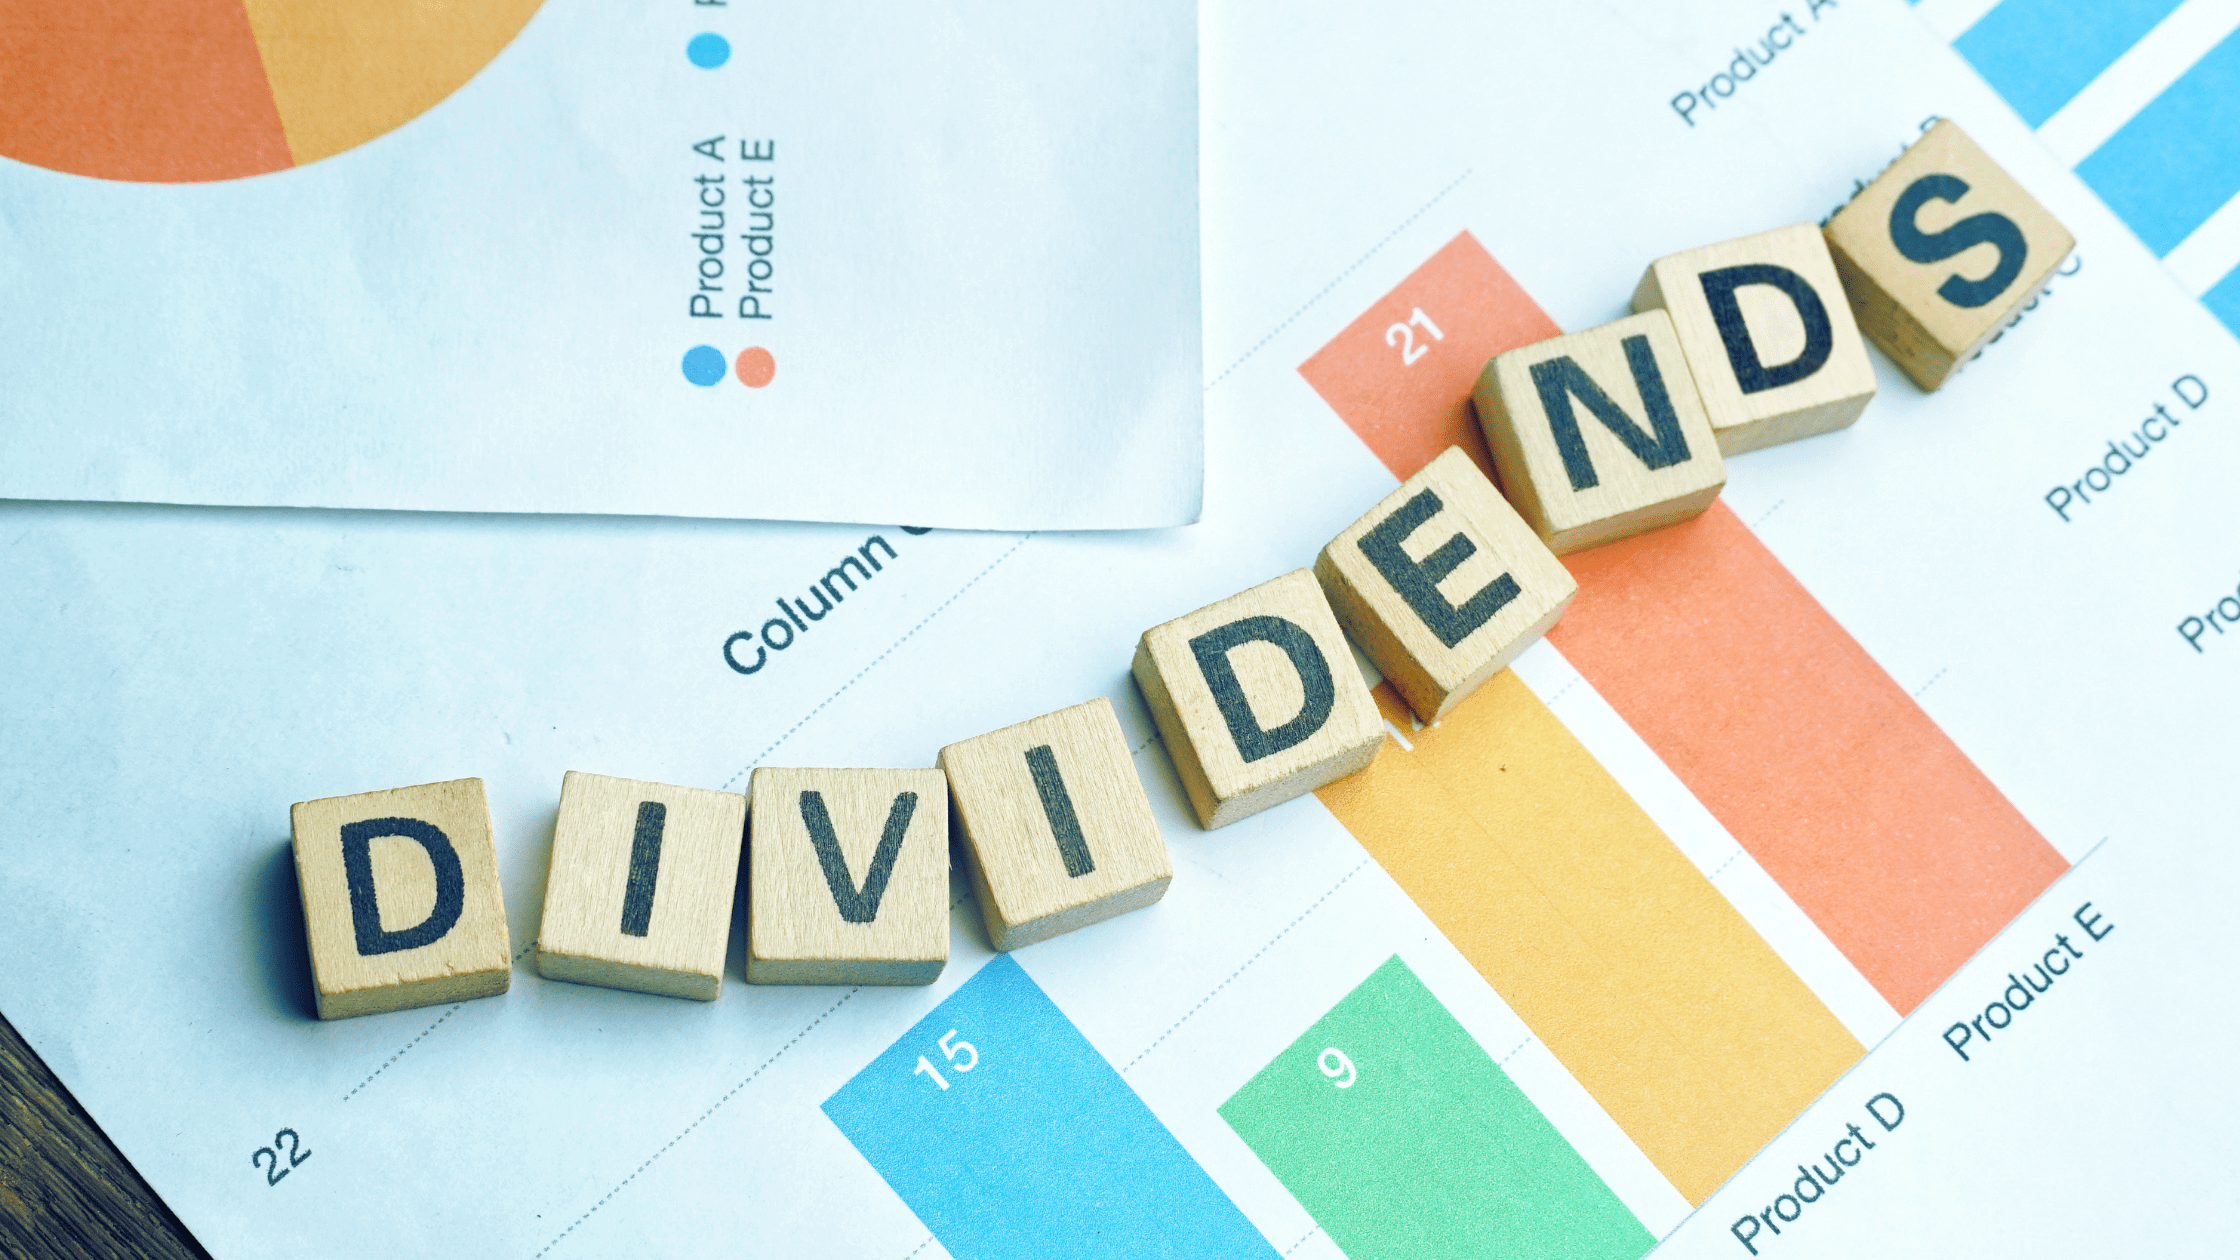 Why Buying Dividend Stocks Can Help Your Portfolio During Market Volatility